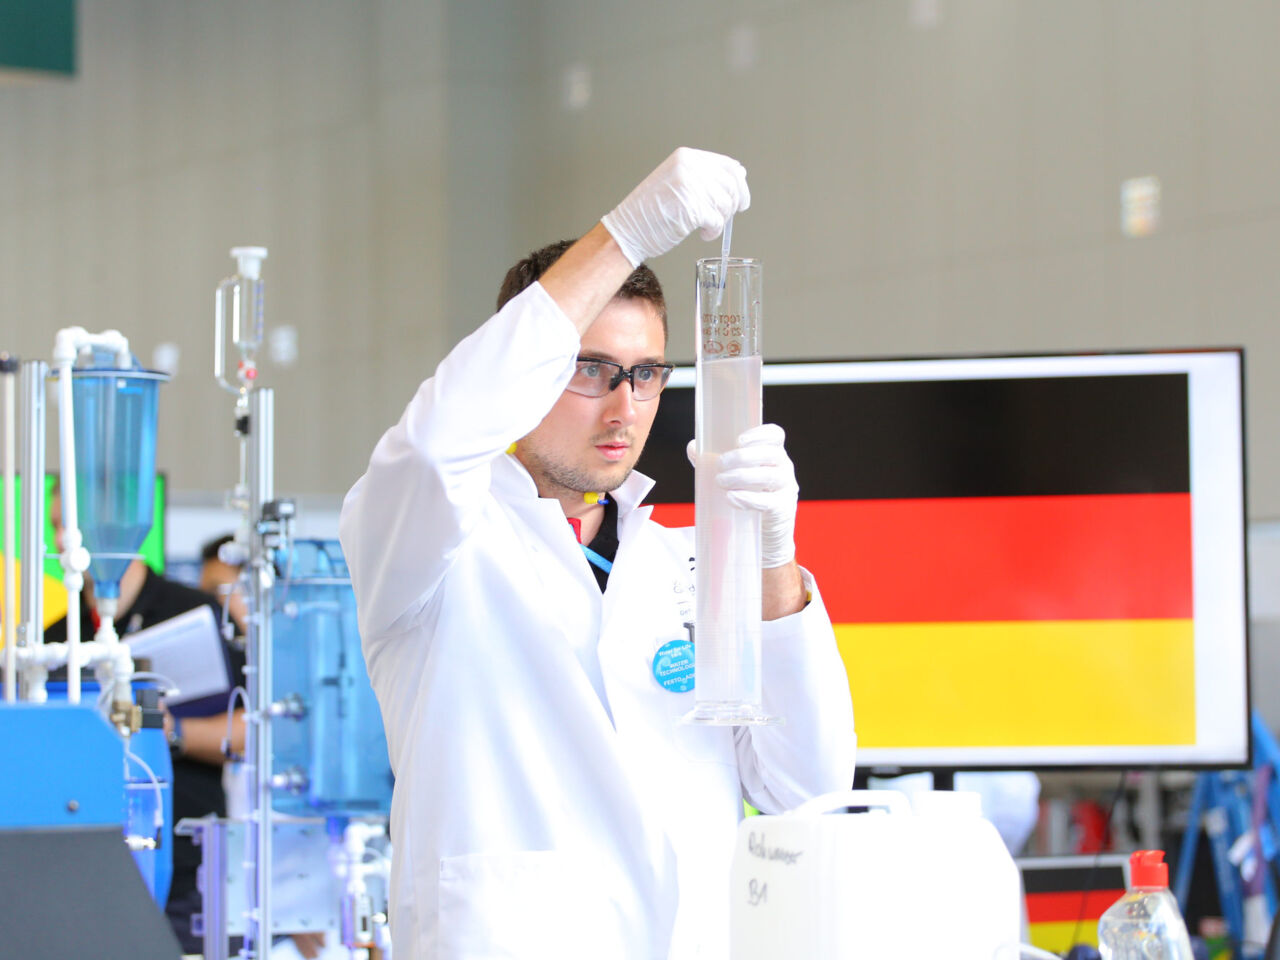 Lukas Kohl was a runner-up at IFAT, a German competition for water technology, and made to WorldSkills Kazan 2019,
